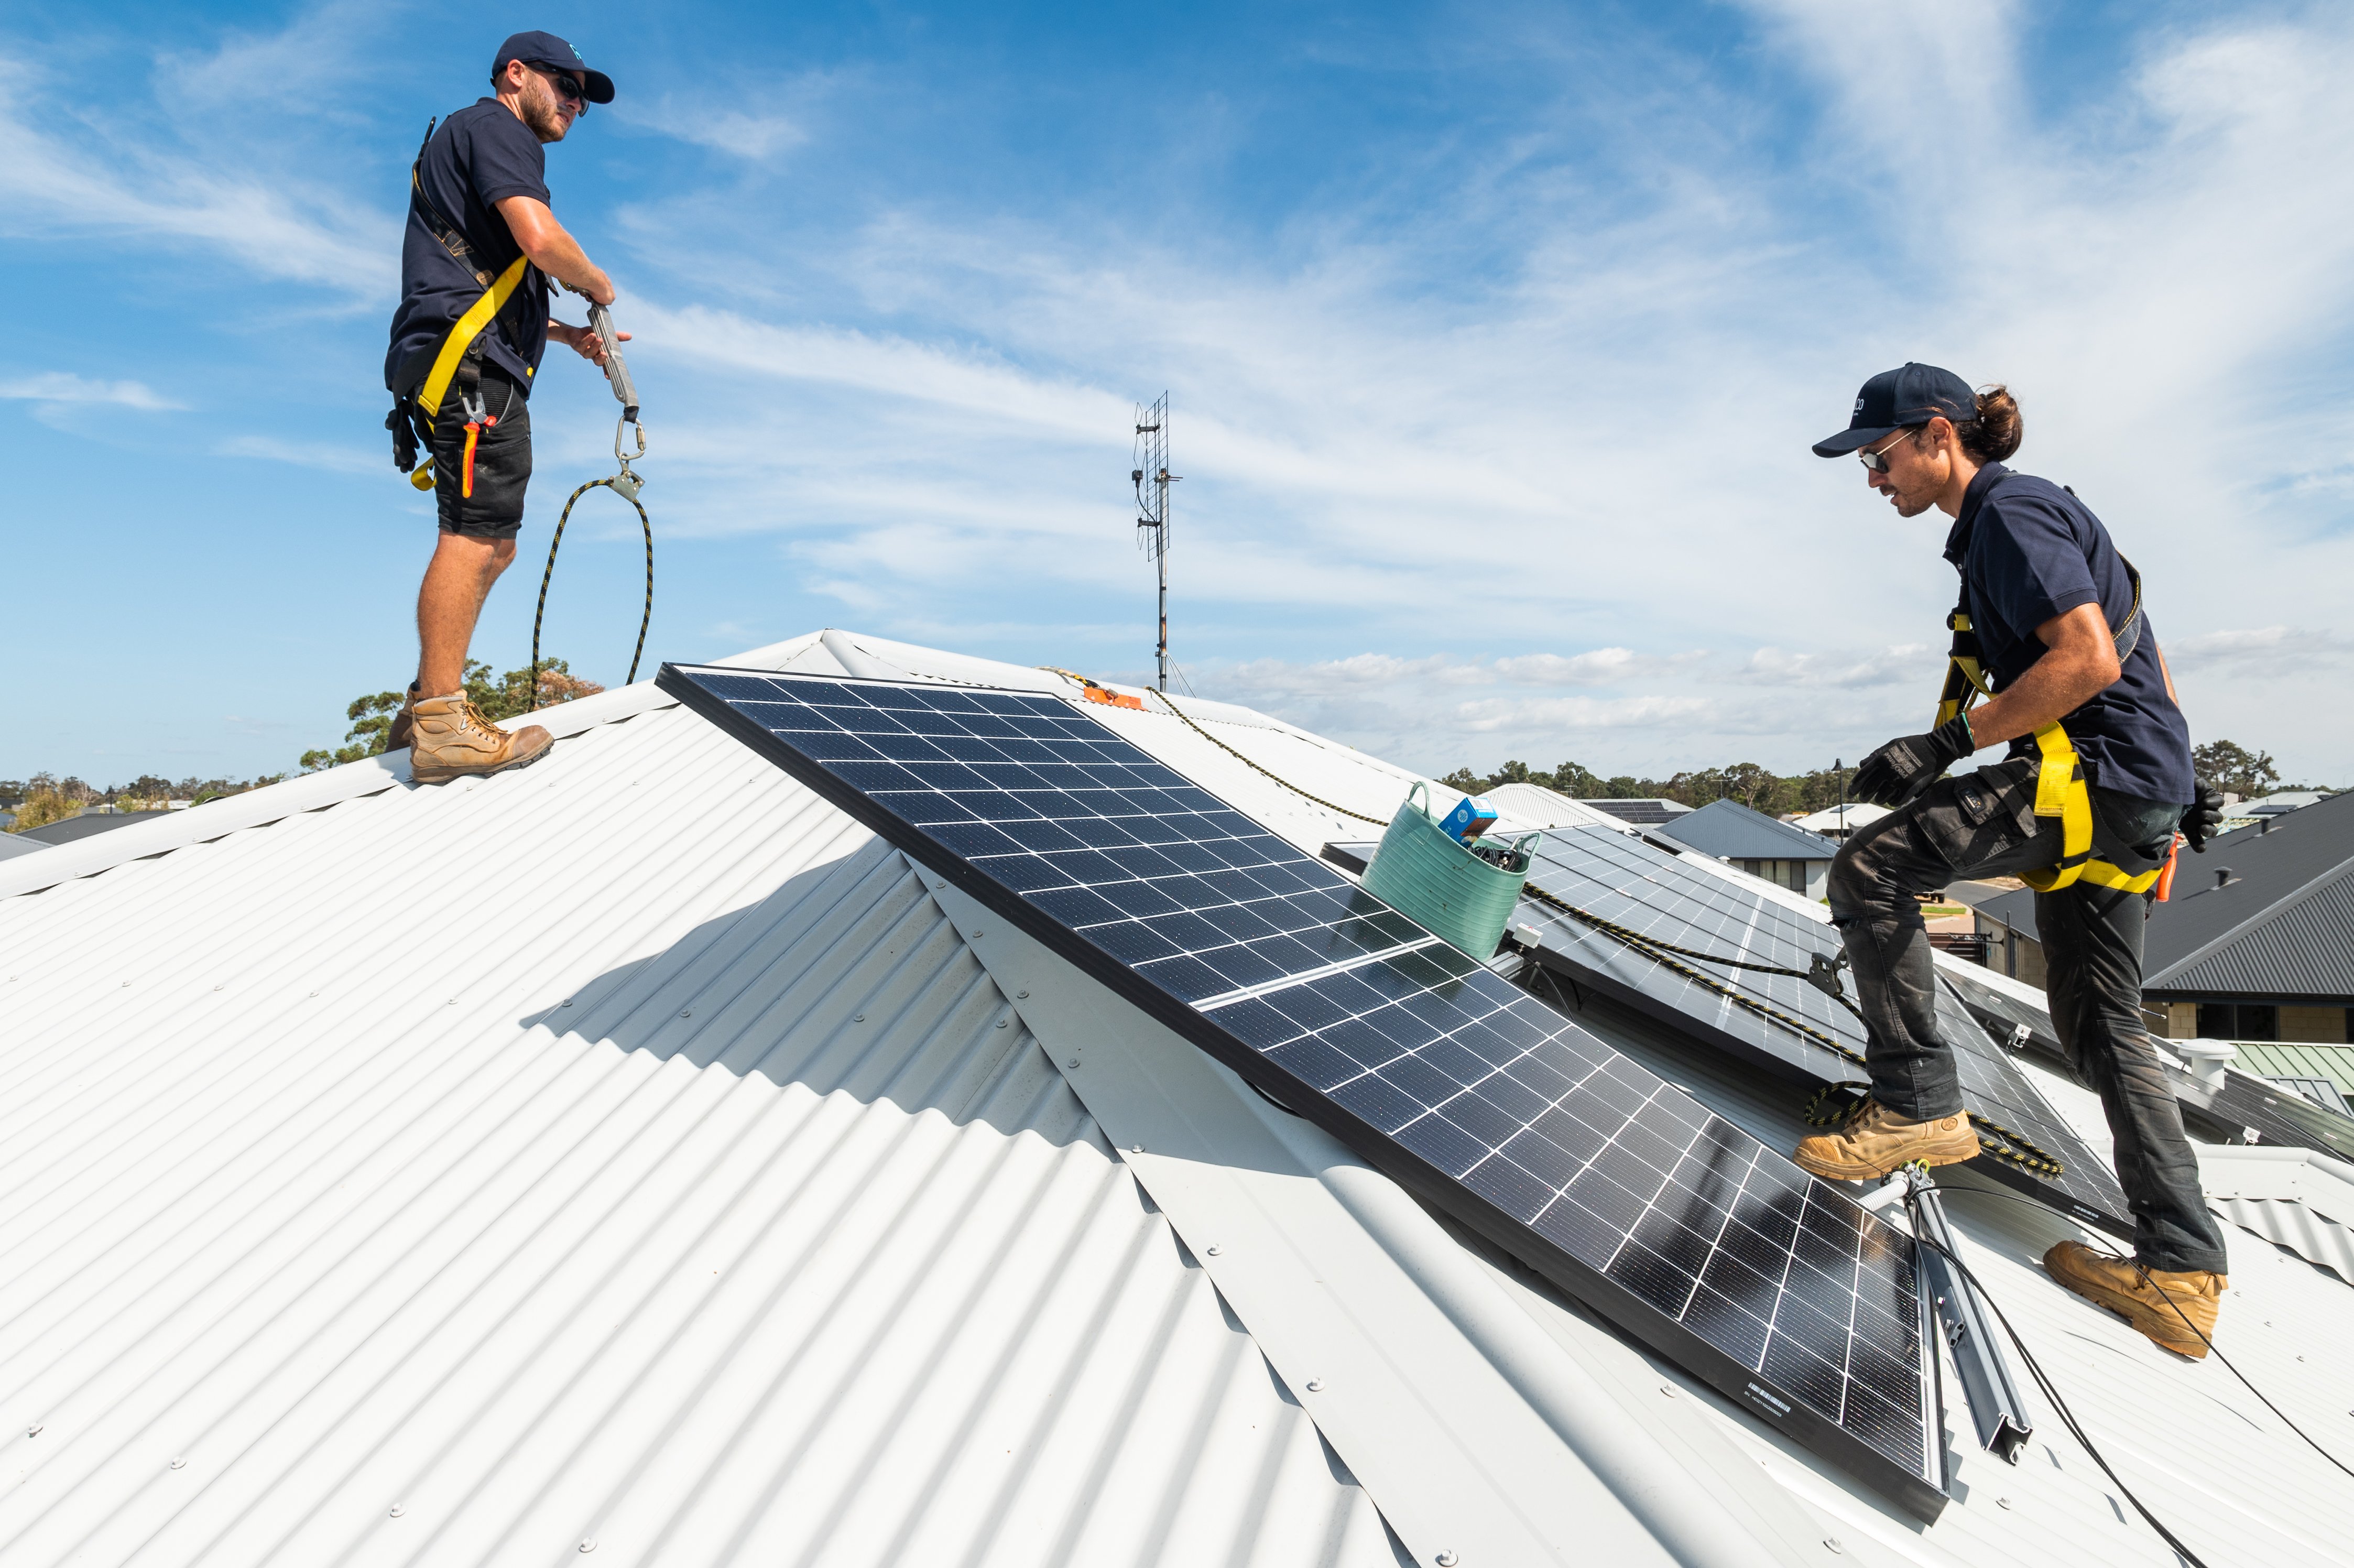 The Plico team installing solar panels on a white, corrugated roof